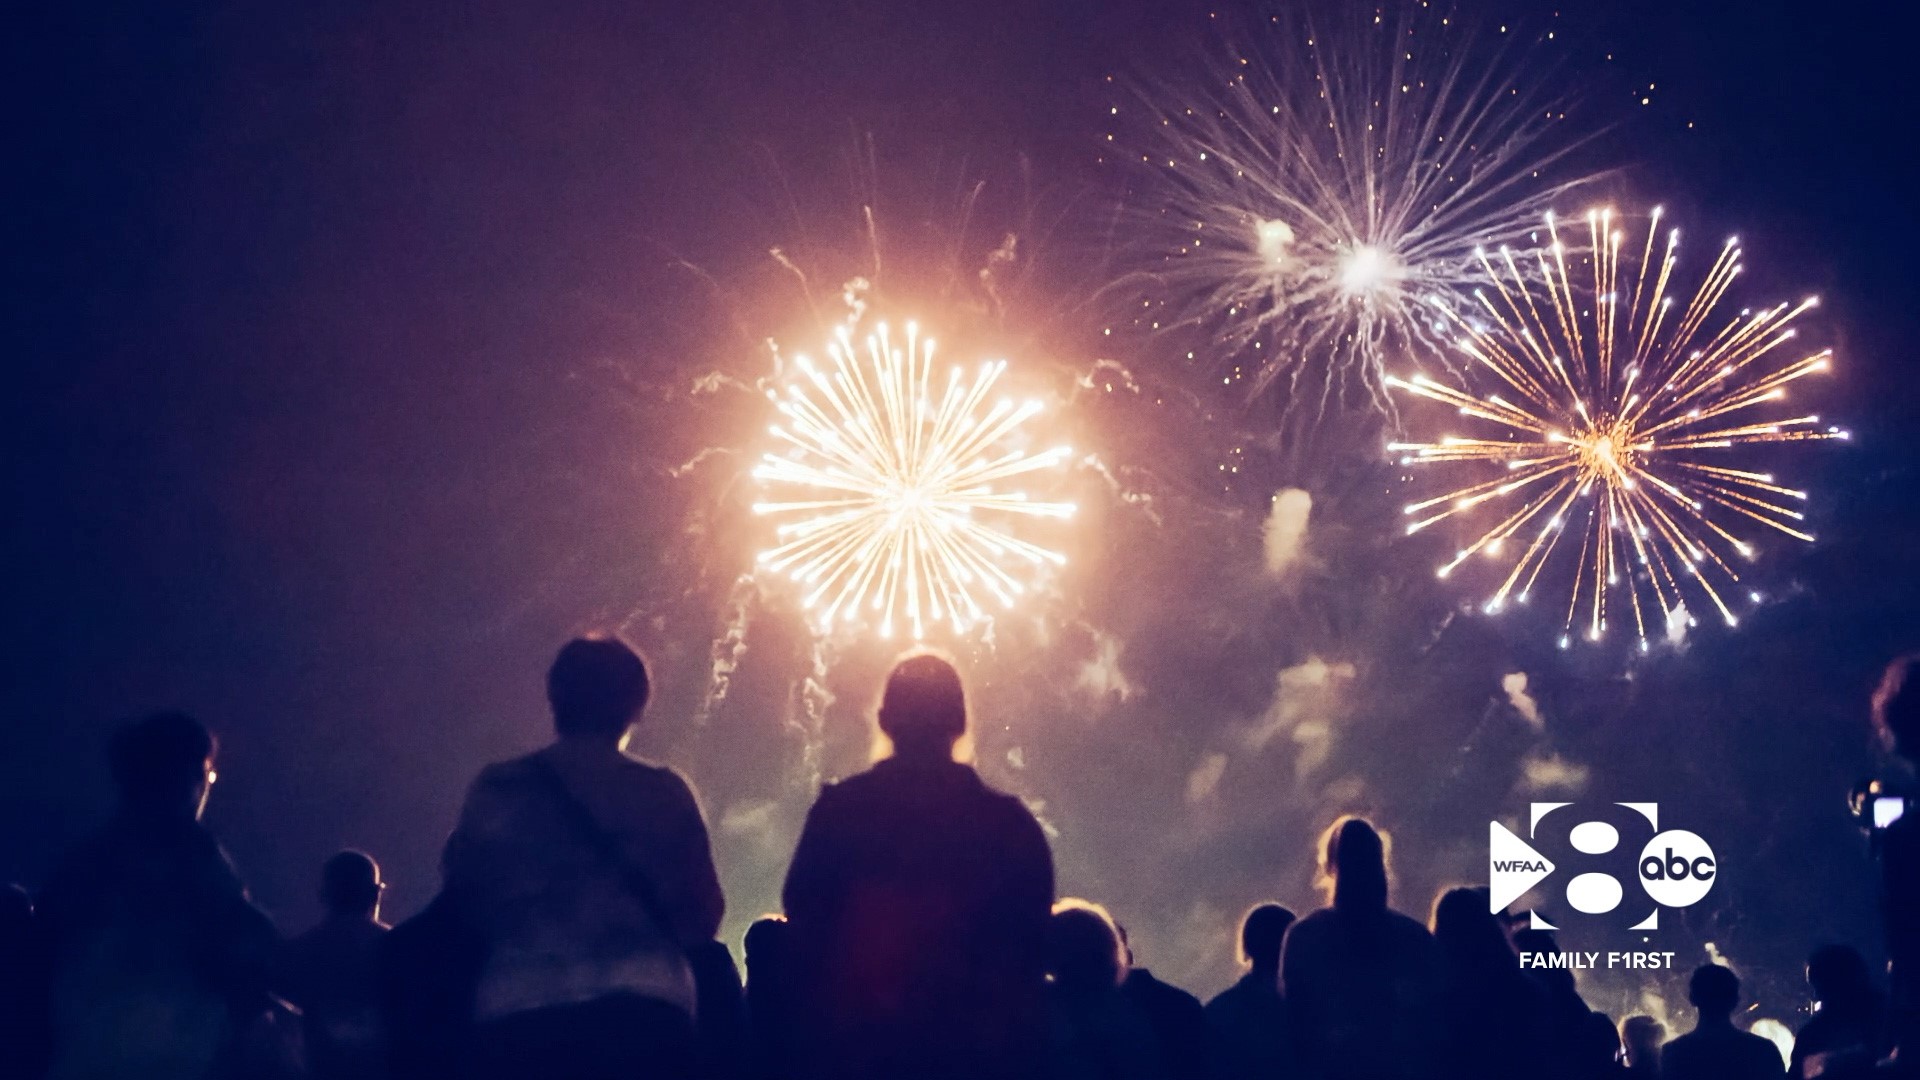 Come celebrate Independence Day at the “Lake Cities 4th of July” festivities in Lake Dallas with live music, food trucks, games, spectacular fireworks and more.